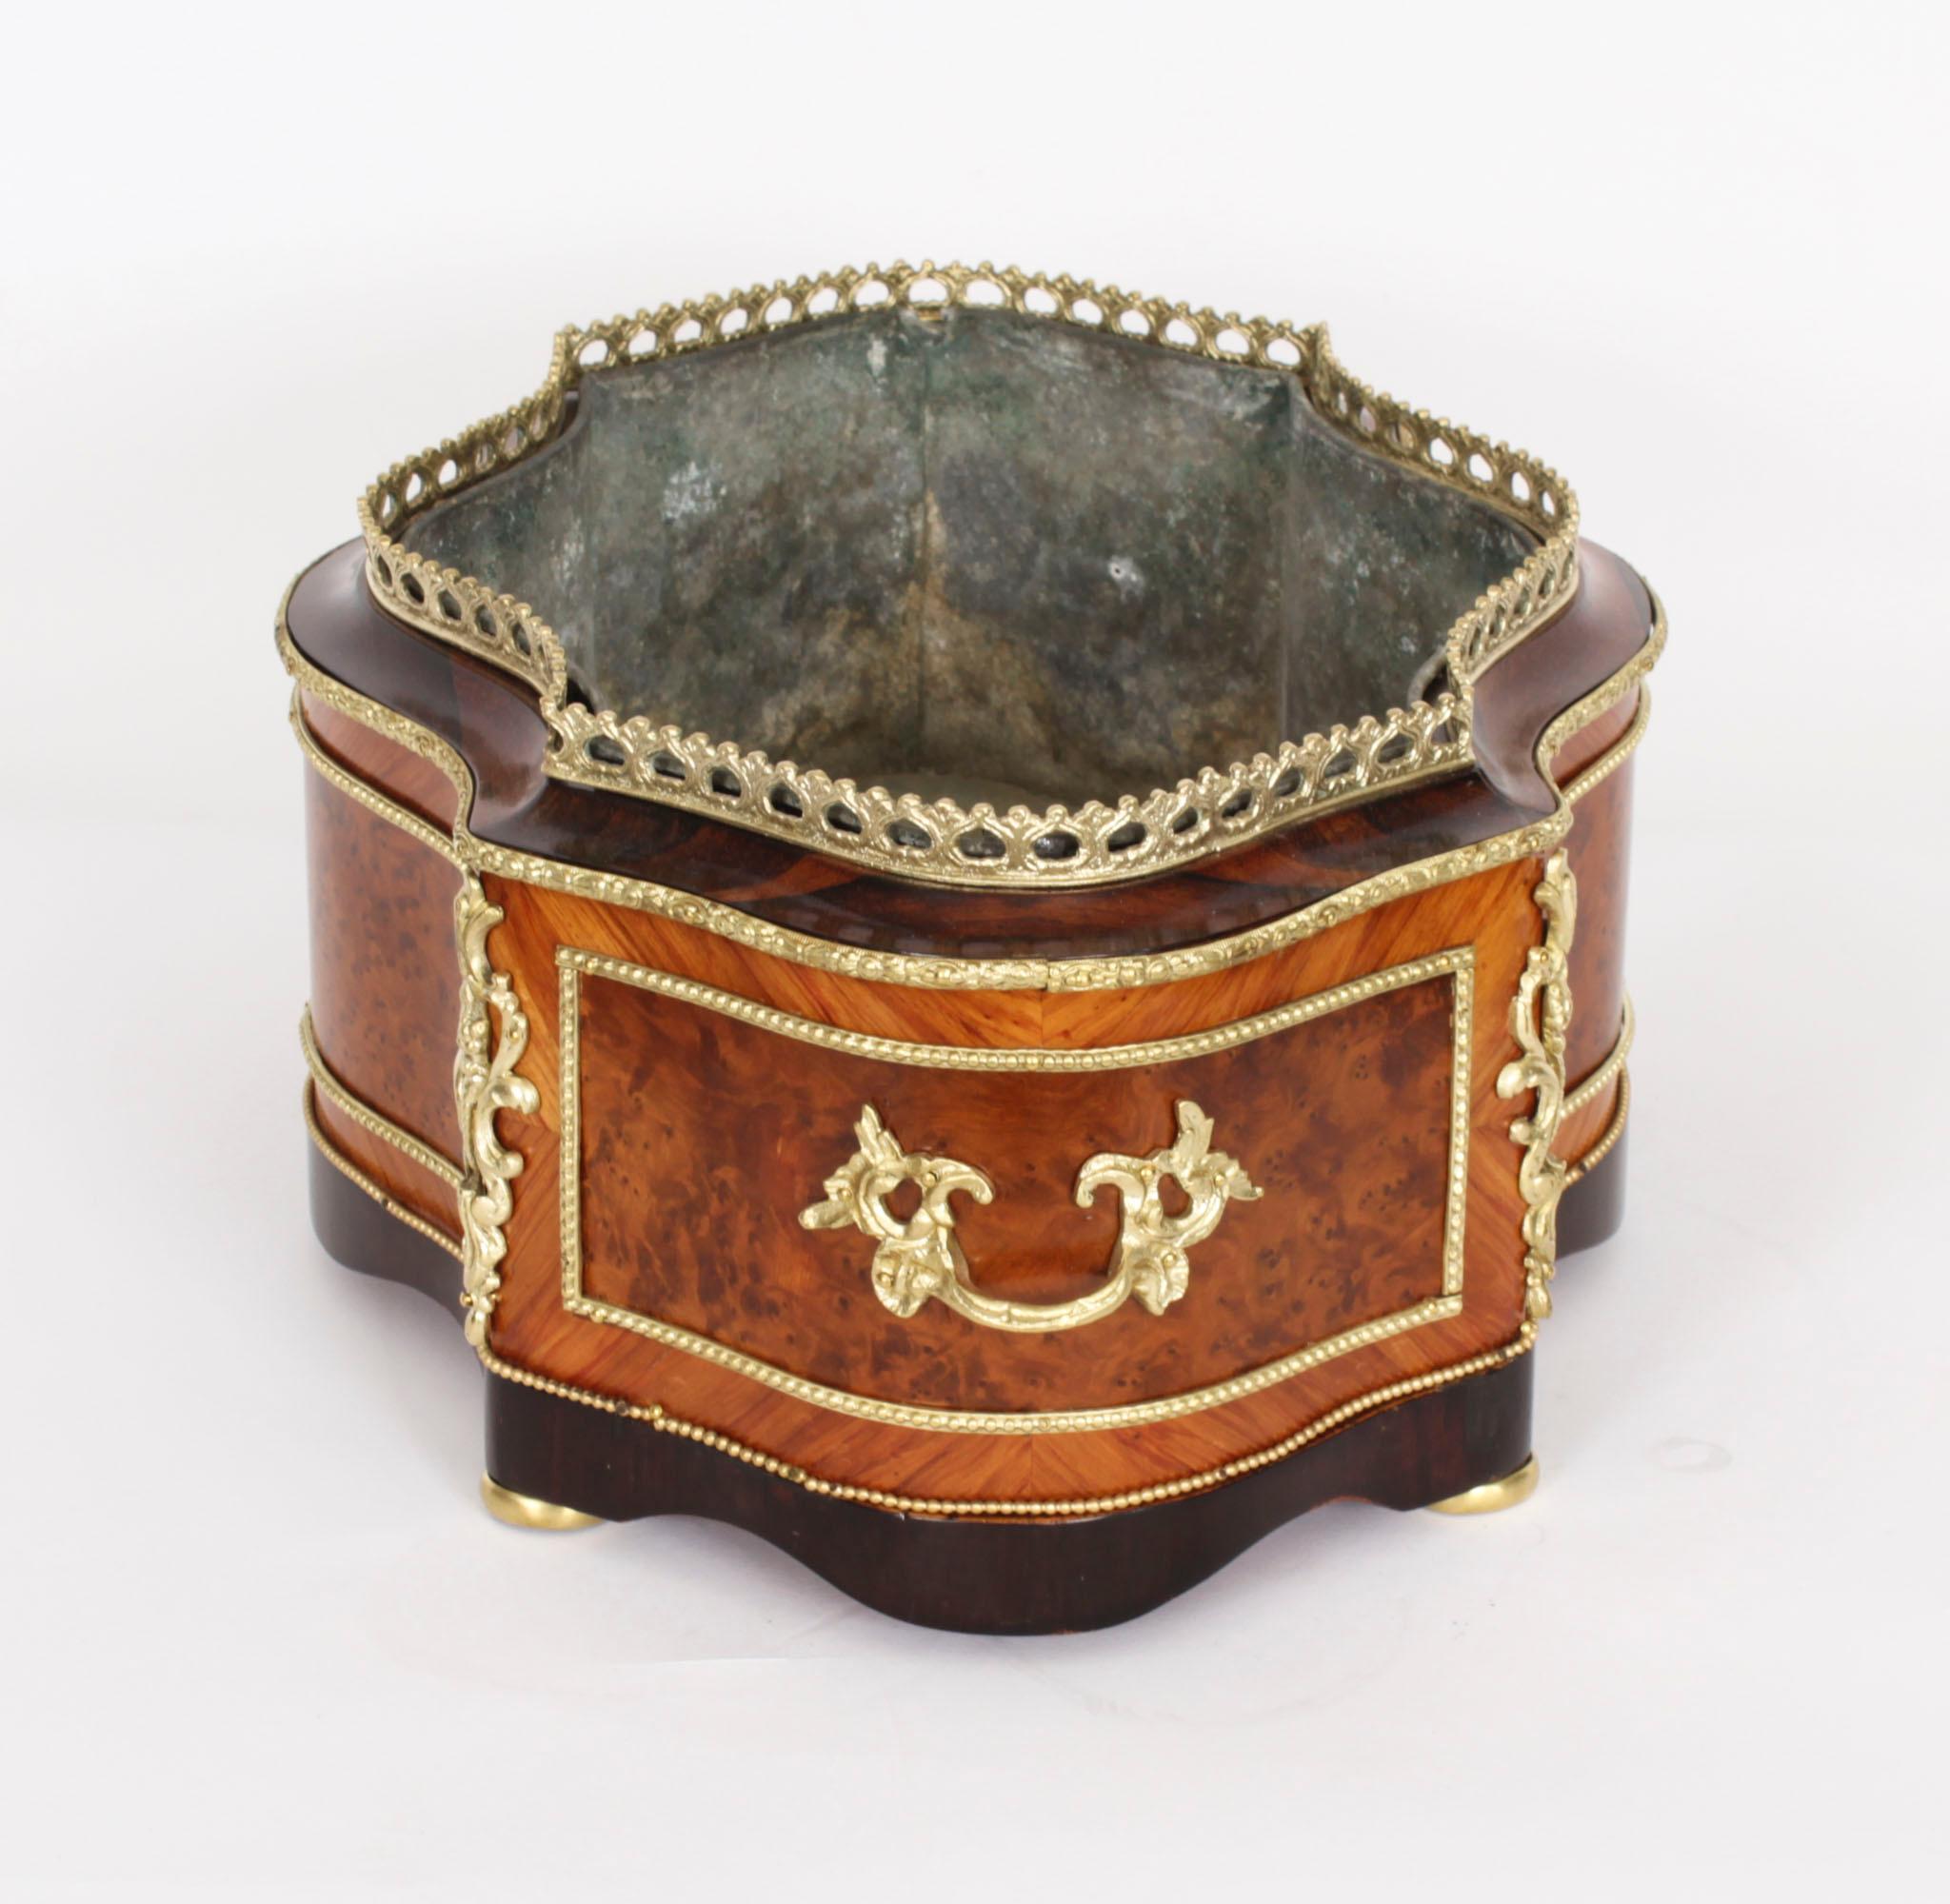 Antique French Ormolu Mounted Planter Jardiniere 19th Century For Sale 1